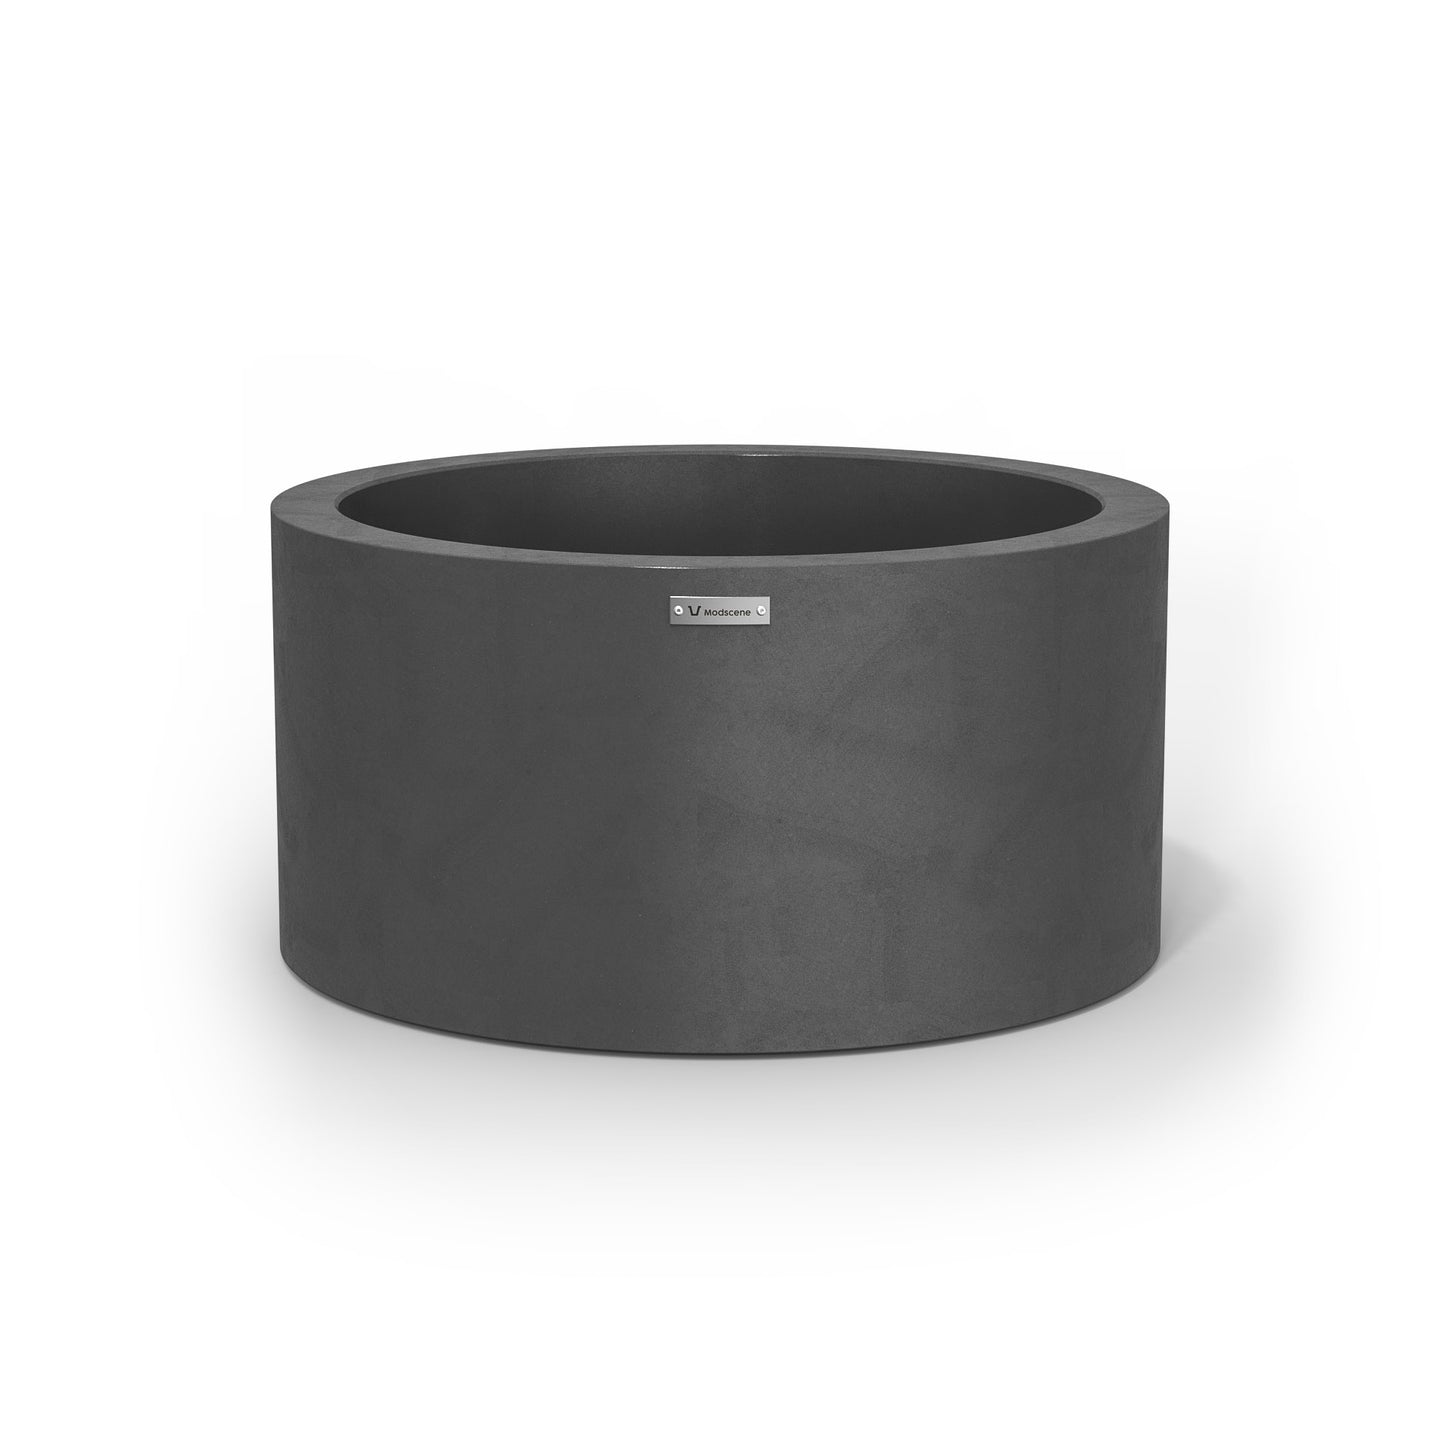 A medium sized planter pot in a brushed grey colour made by Modscene.